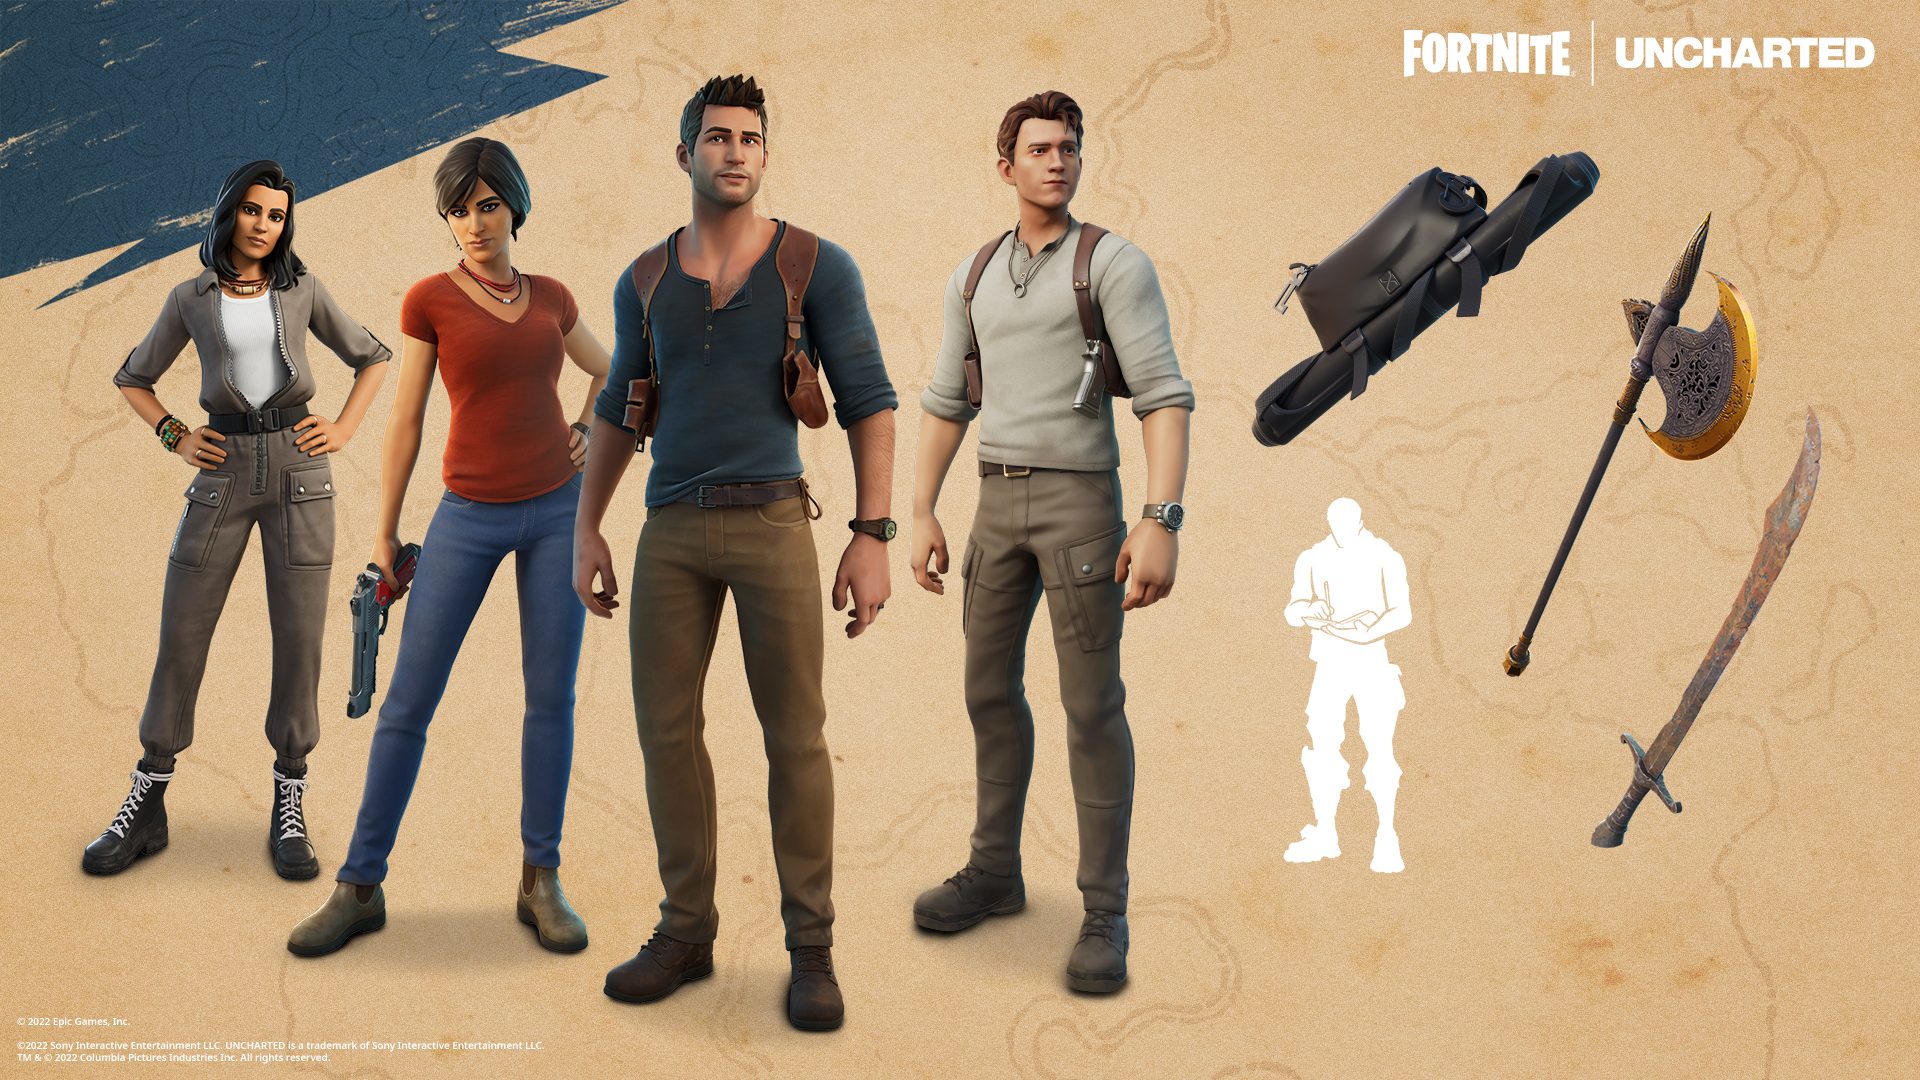 Find your Fortune on the Fortnite Island with Nathan Drake and Chloe Frazer from the Uncharted Series – PlayStation.Blog